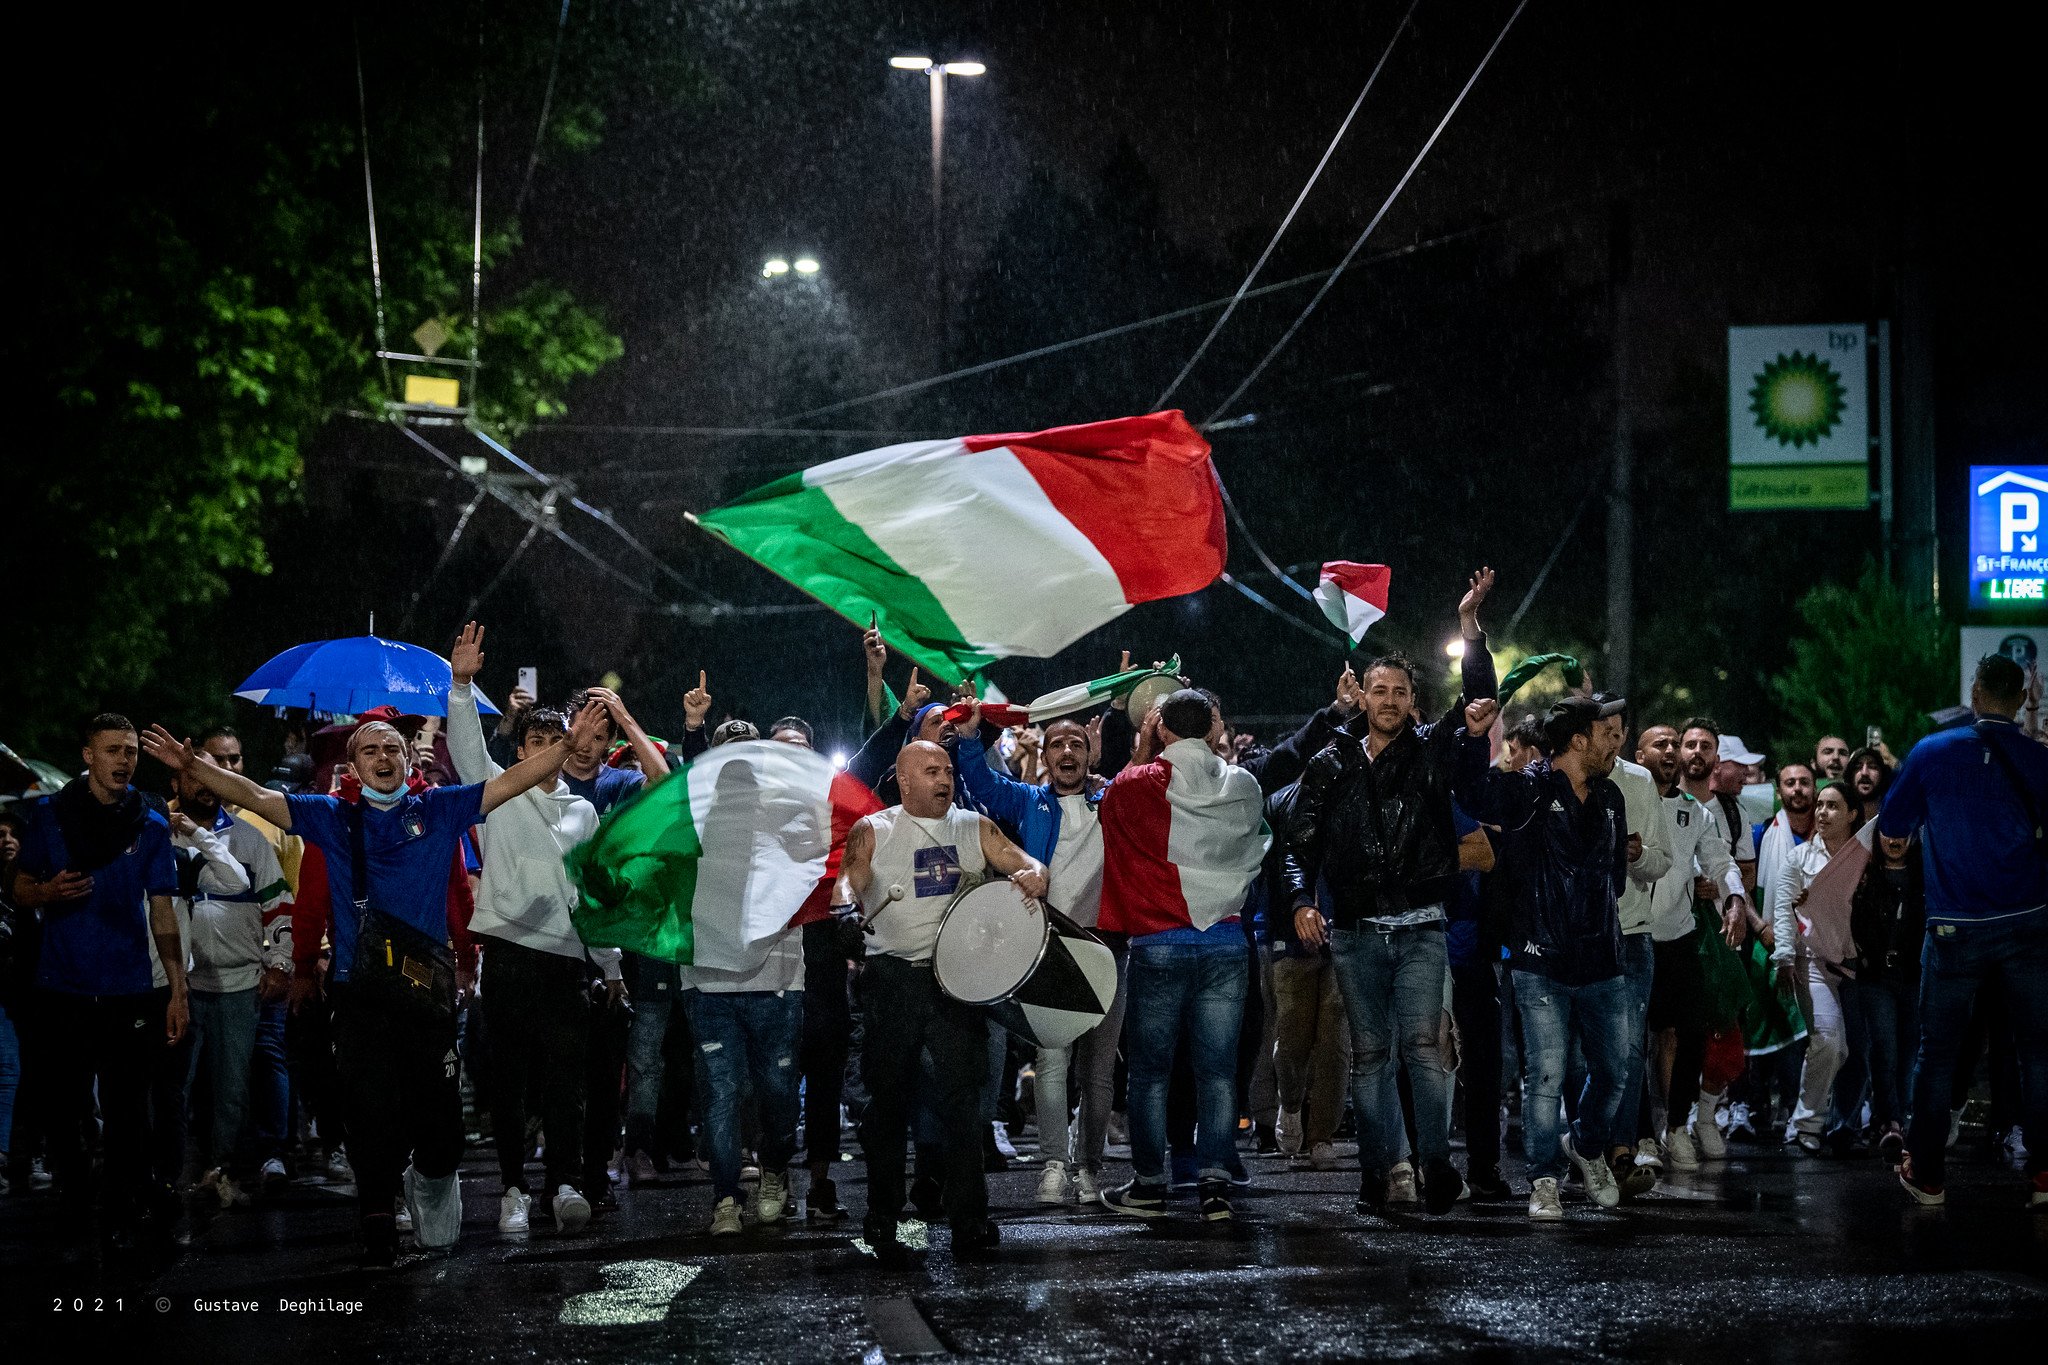 Italy fans during Euro 2020